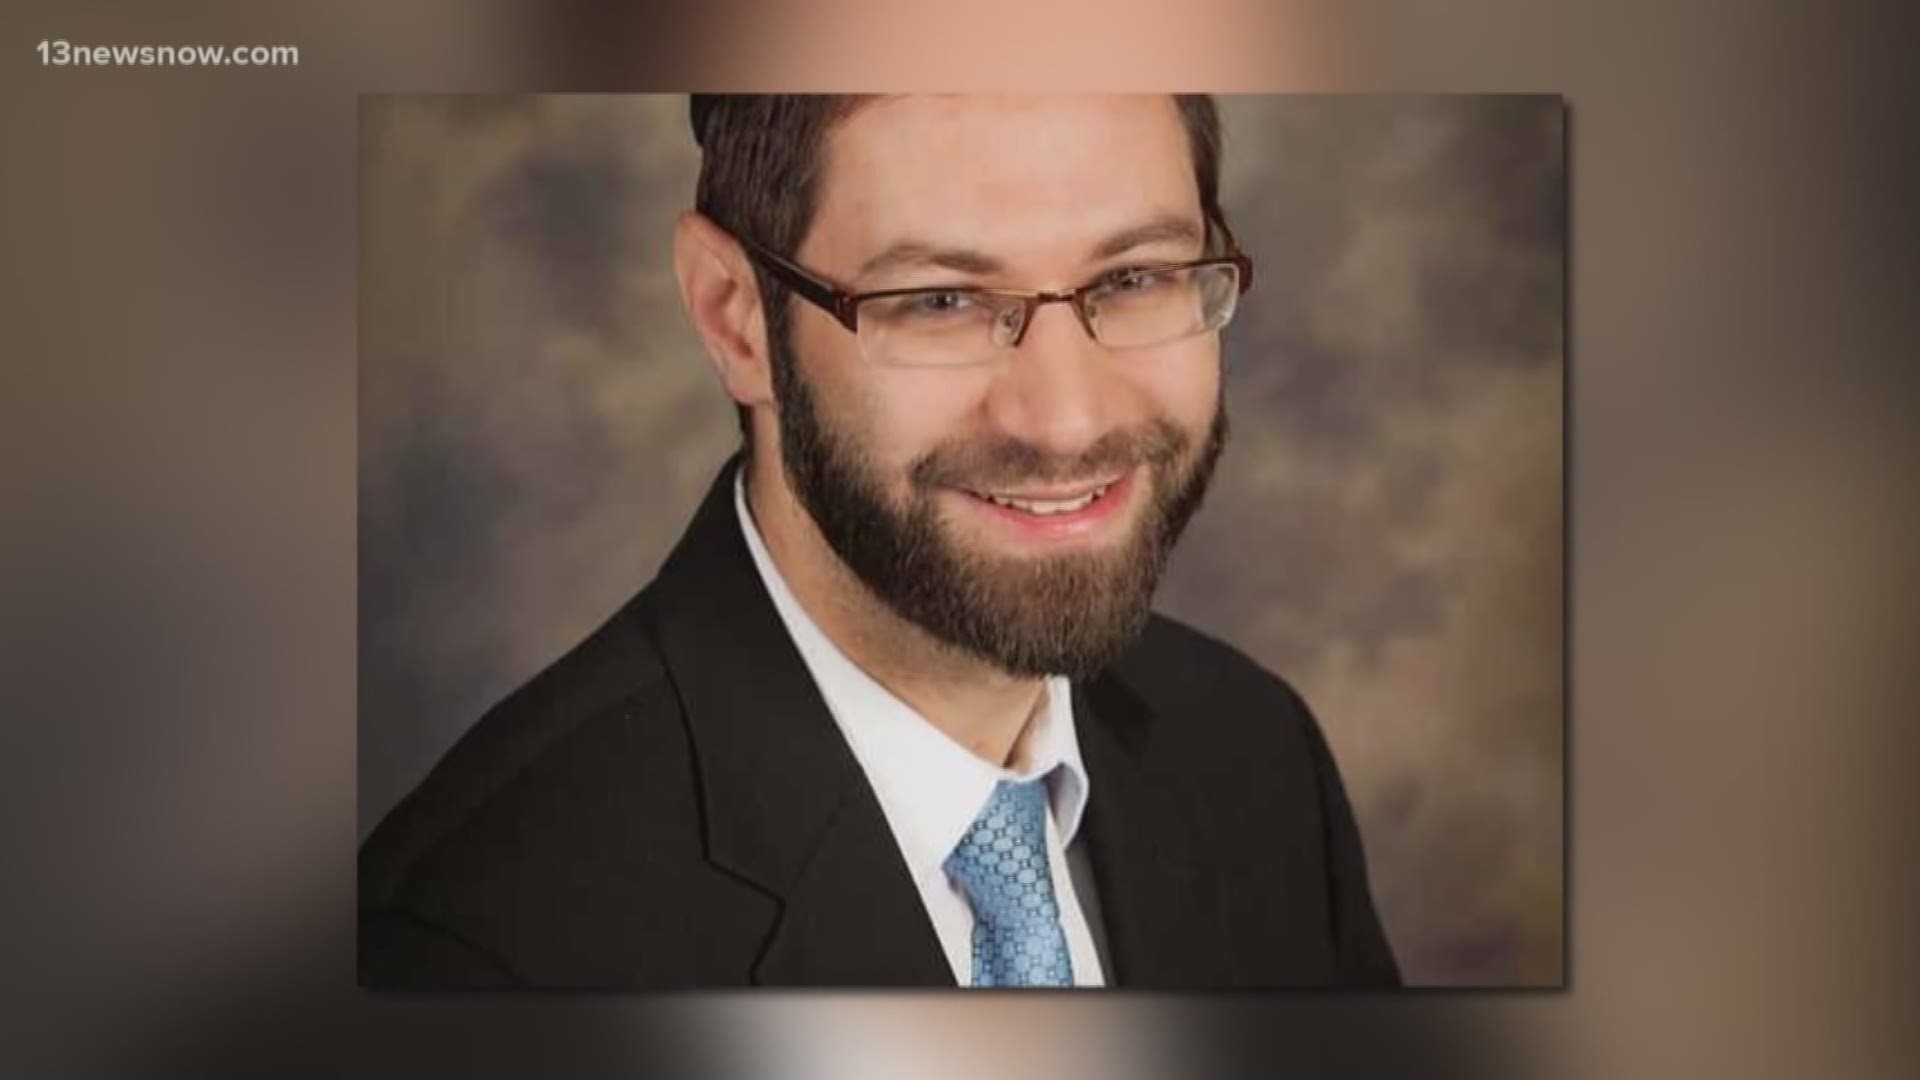 The Coast Guard has suspended a search for a teacher who went missing off False Cape State Park, but Virginia Beach authorities are still looking. A rabbi and member of the B'Nai Israel Congregation confirmed the 35-year-old teacher is Rabbi Reuven Bauman.